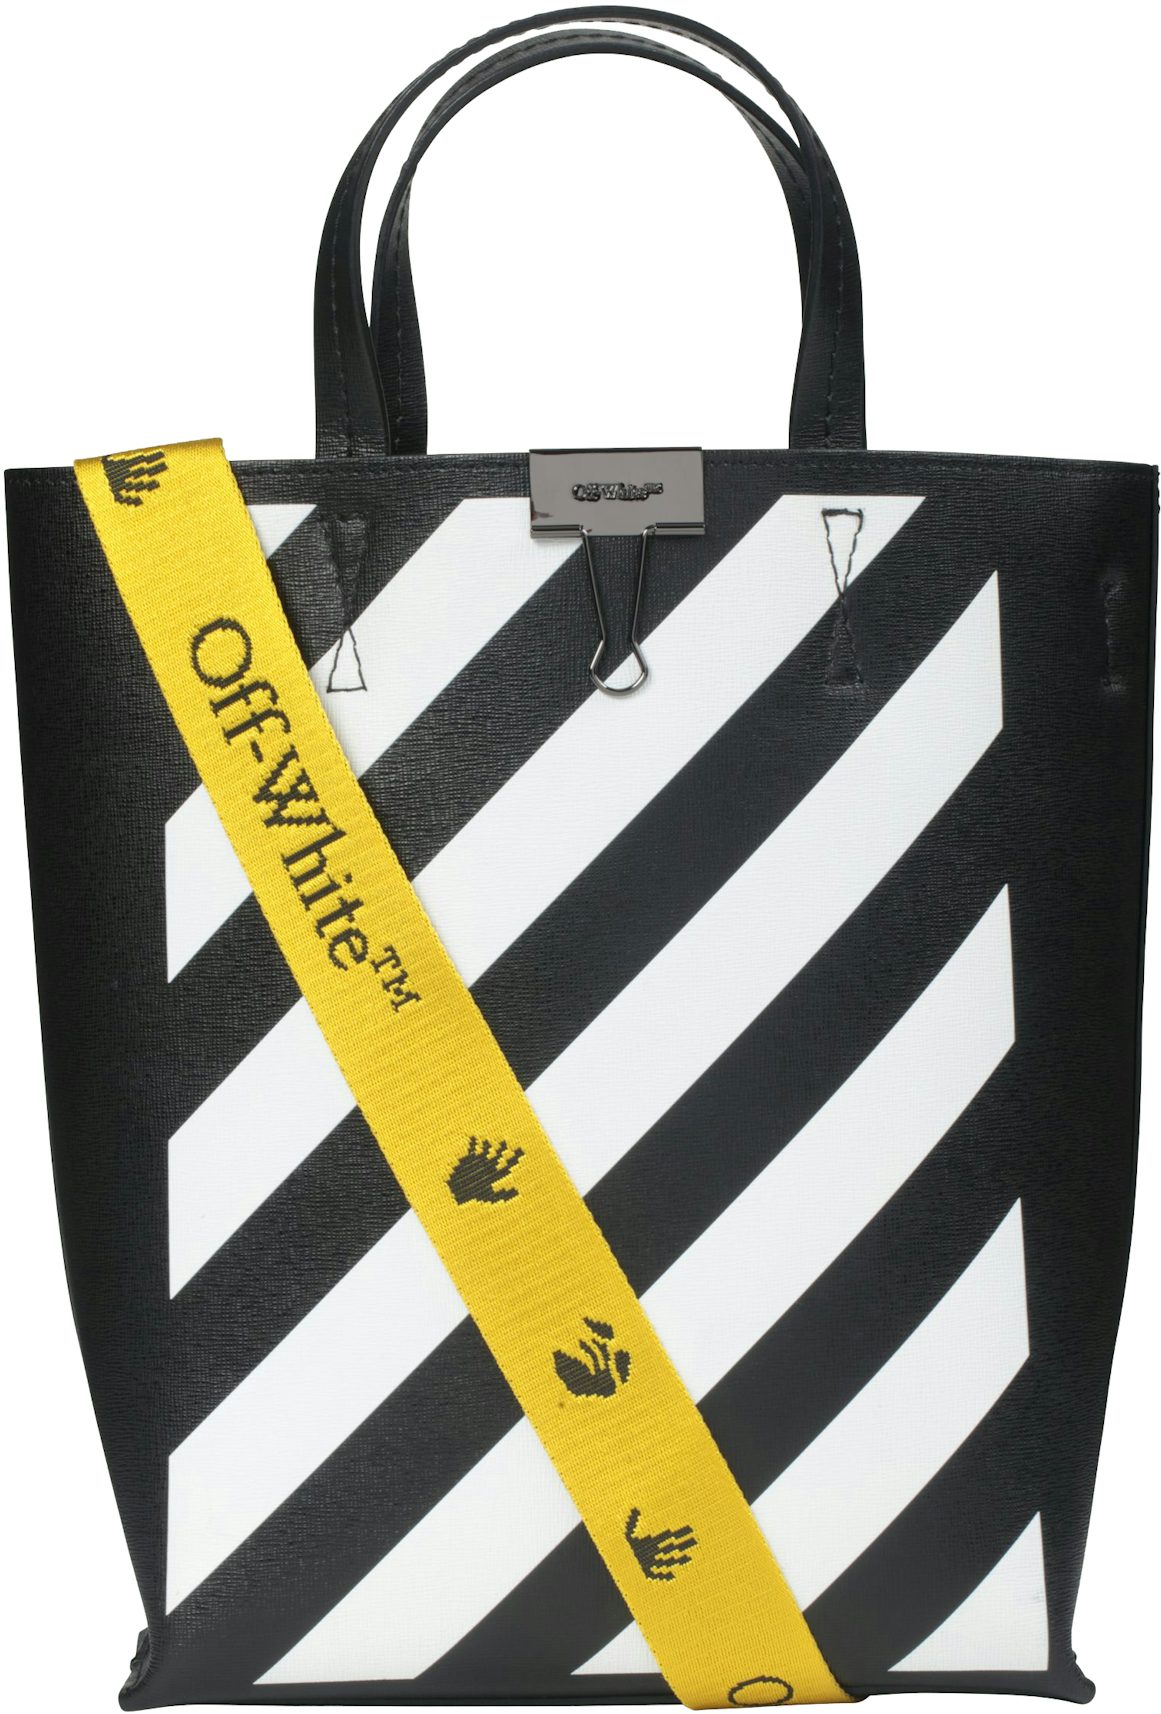 Off-White Diag tote bag - ShopStyle